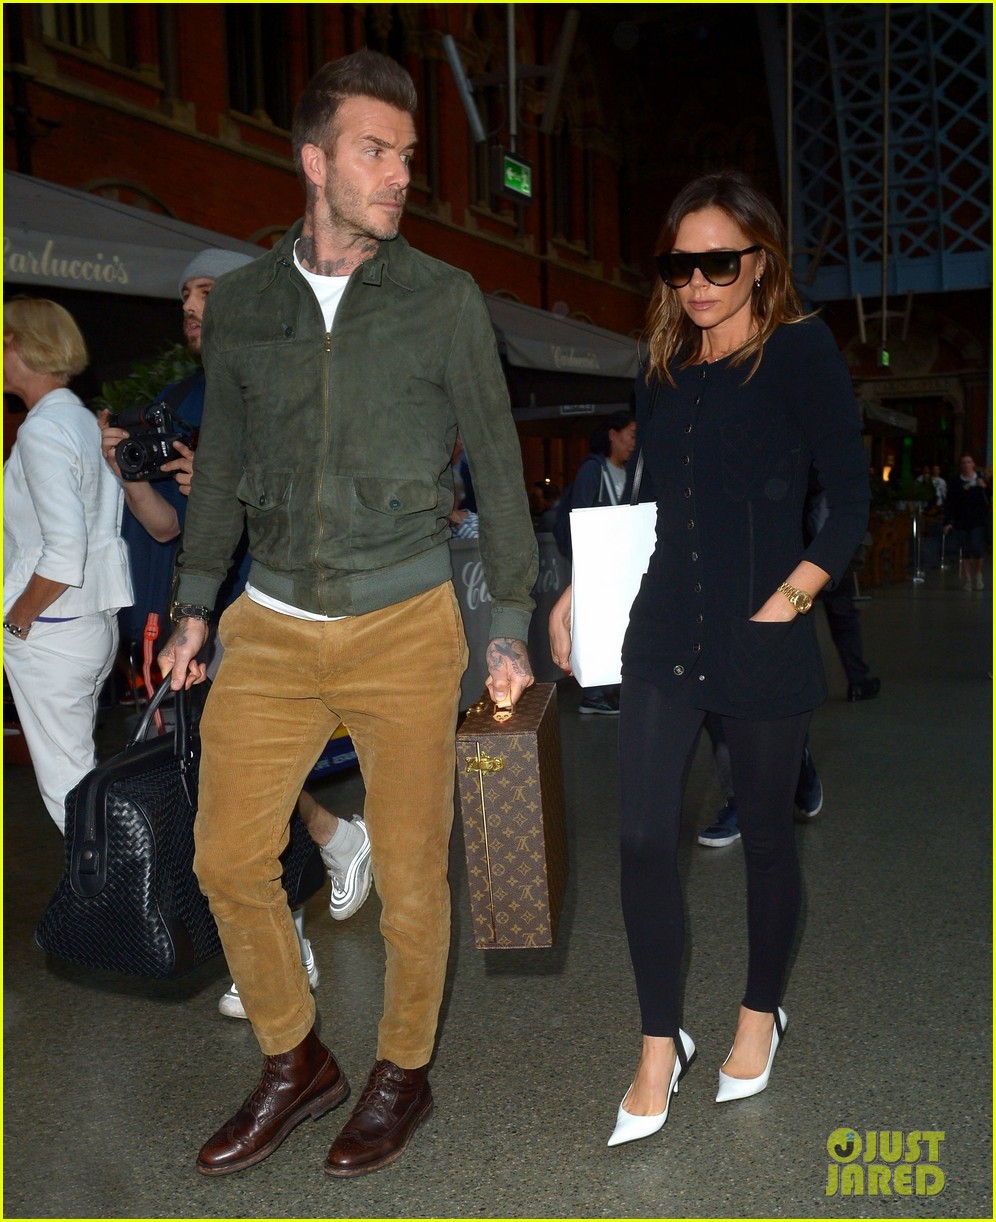 David & Victoria Beckham Travel from Paris to London By Train: Photo ...